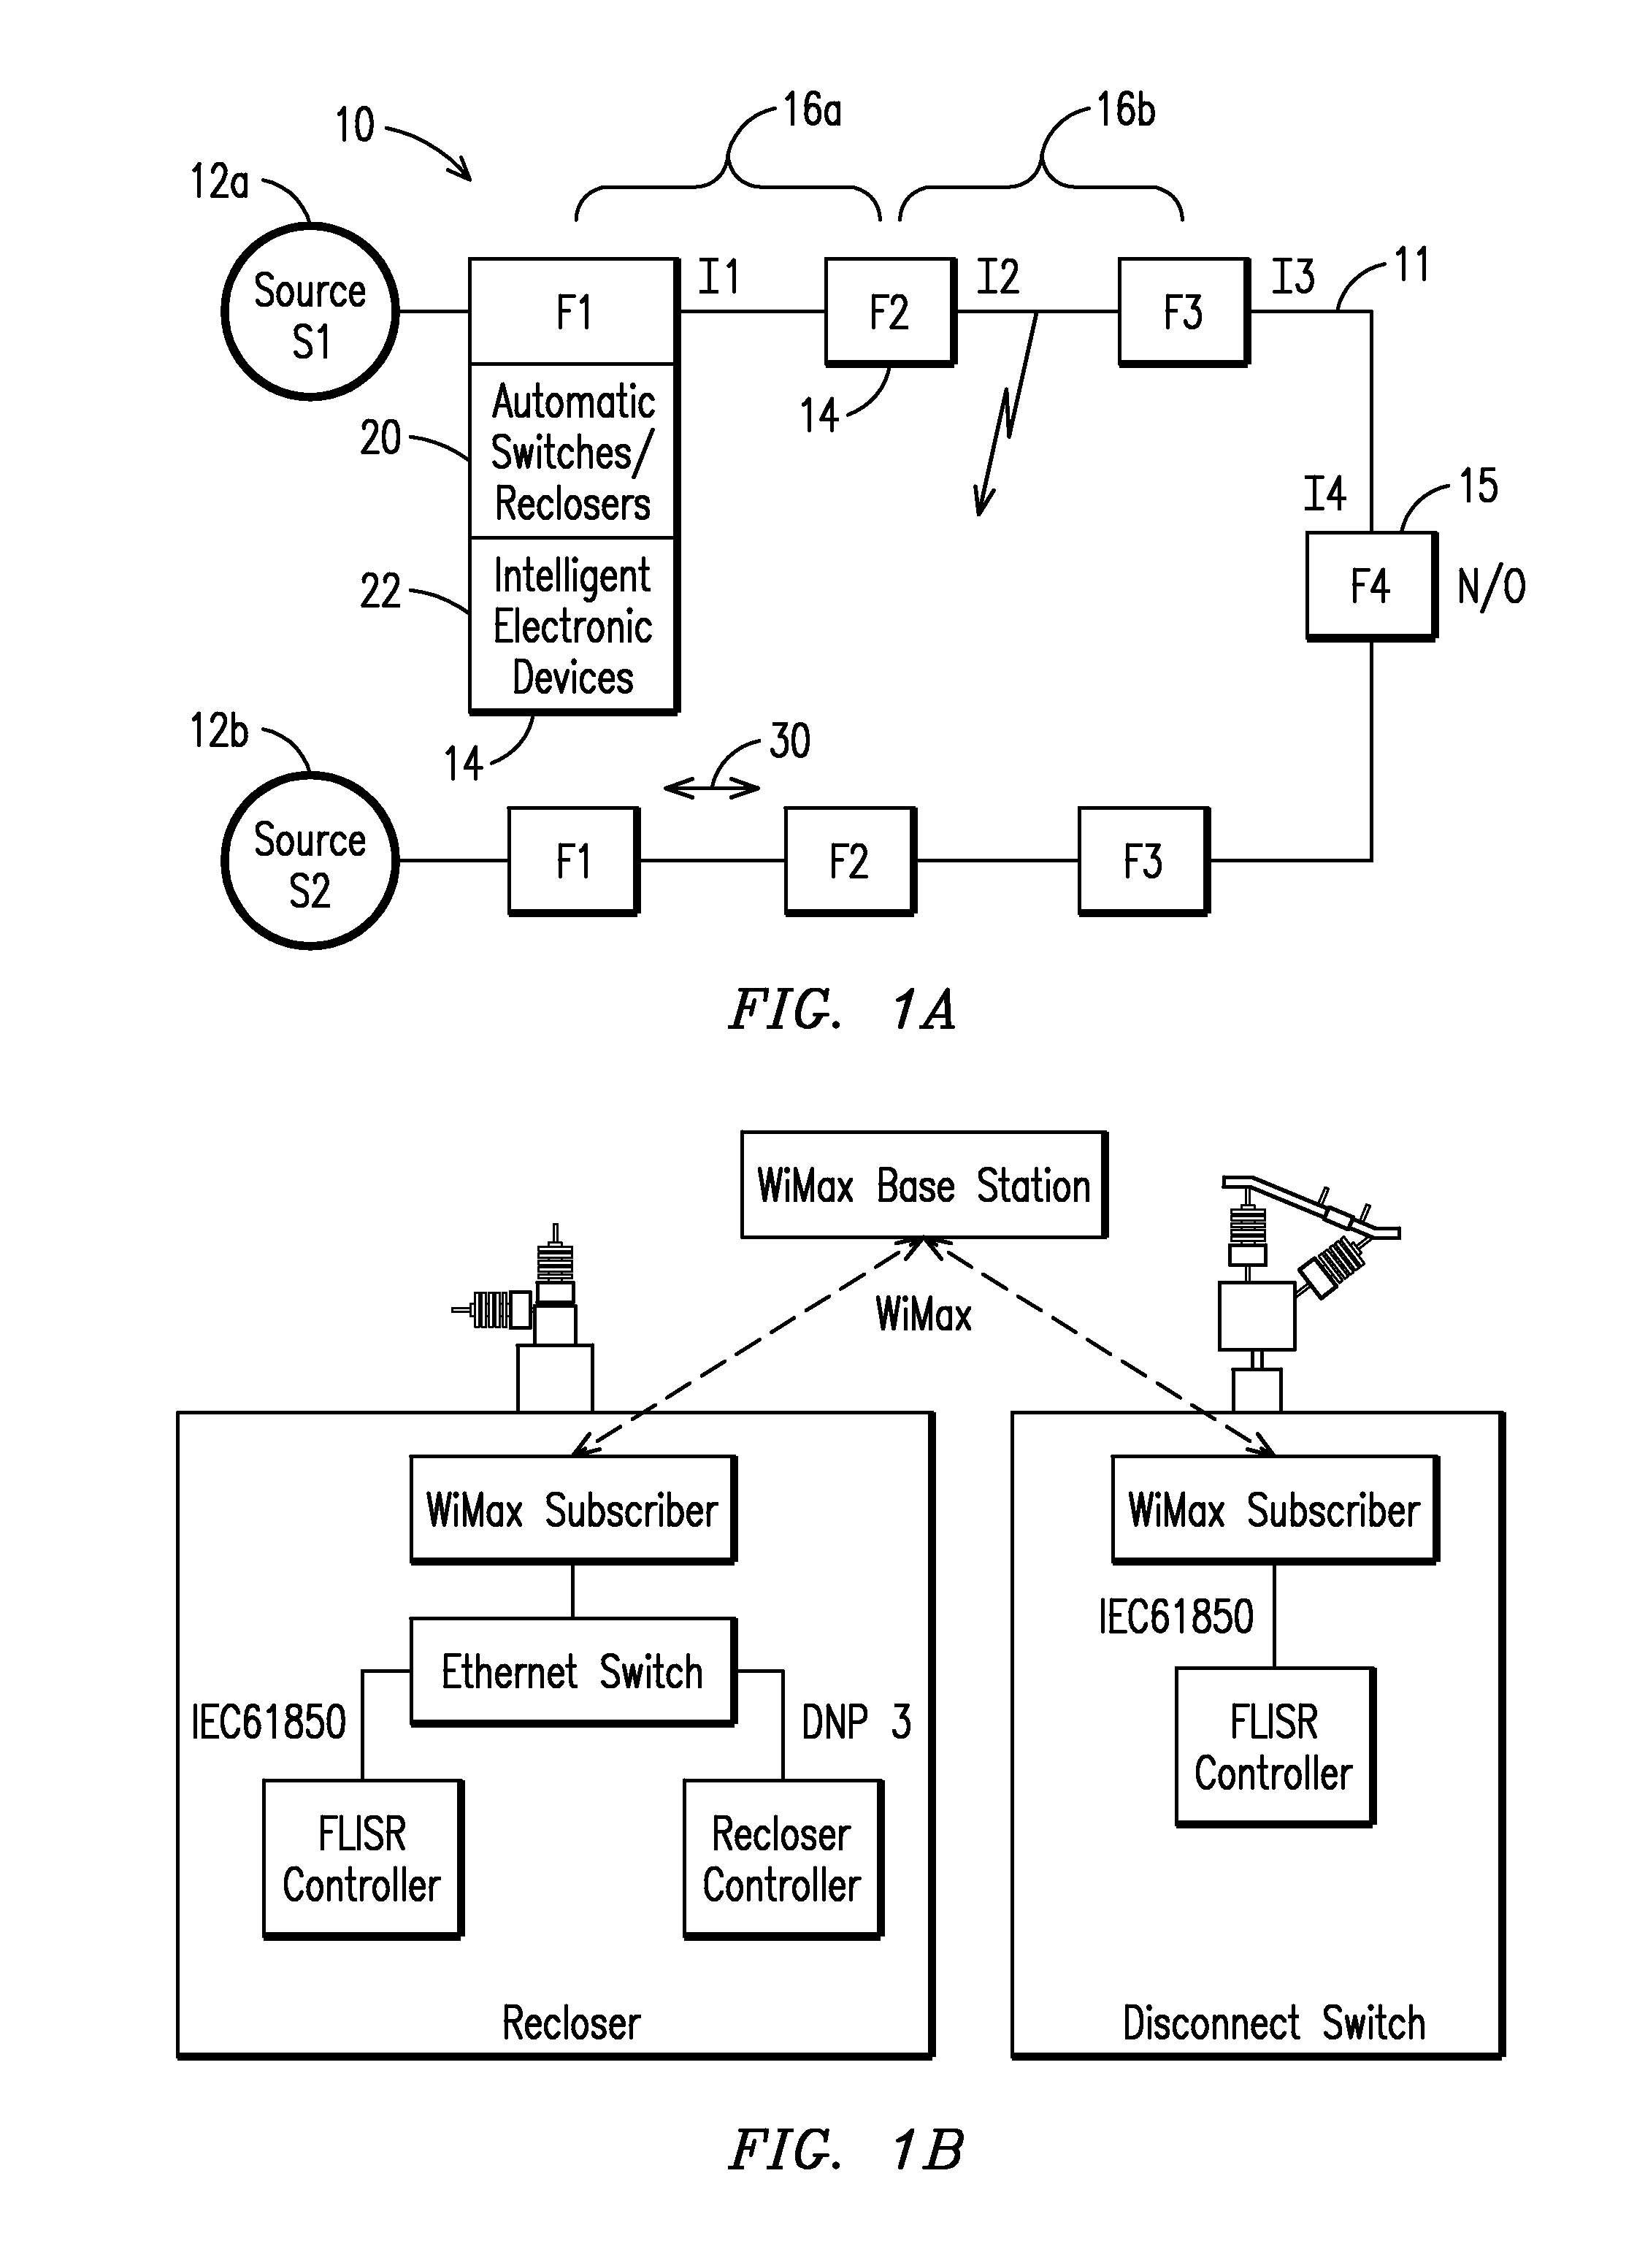 Method and system for programming and implementing automated fault isolation and restoration using sequential logic